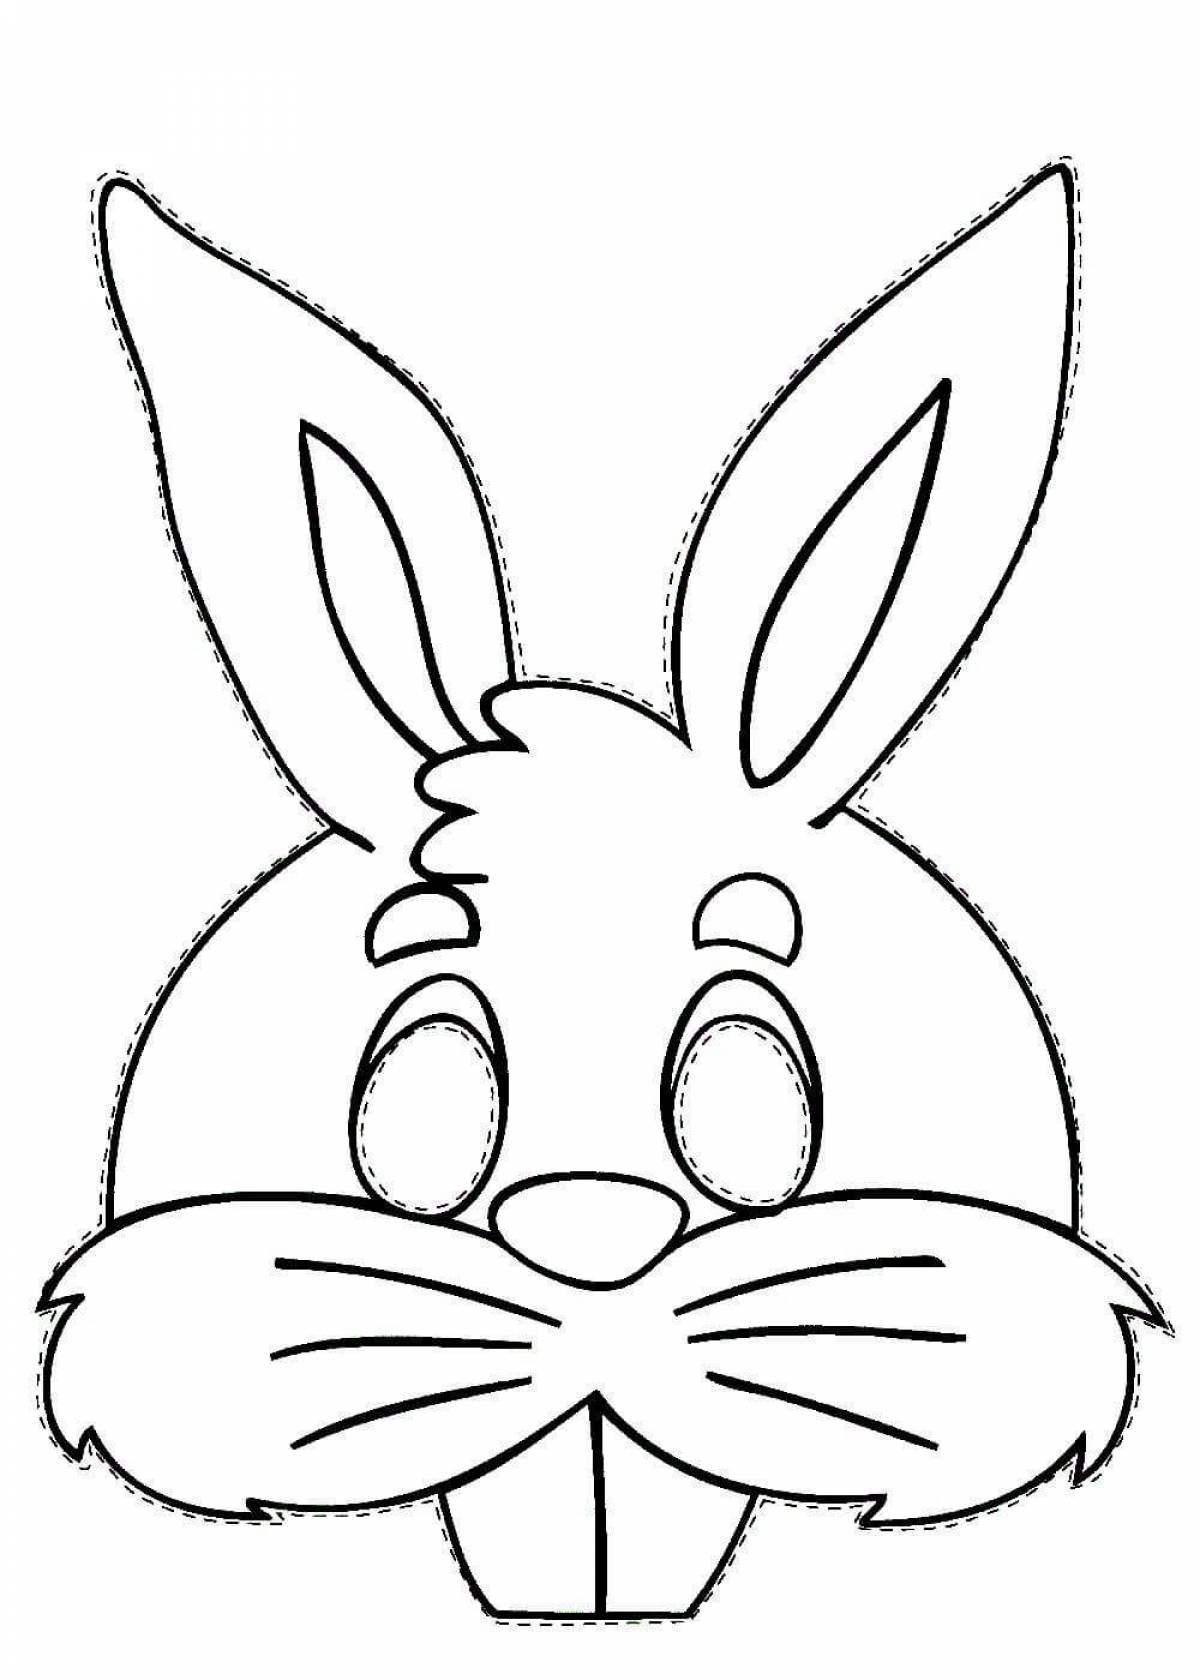 Coloring book exquisite face of a hare